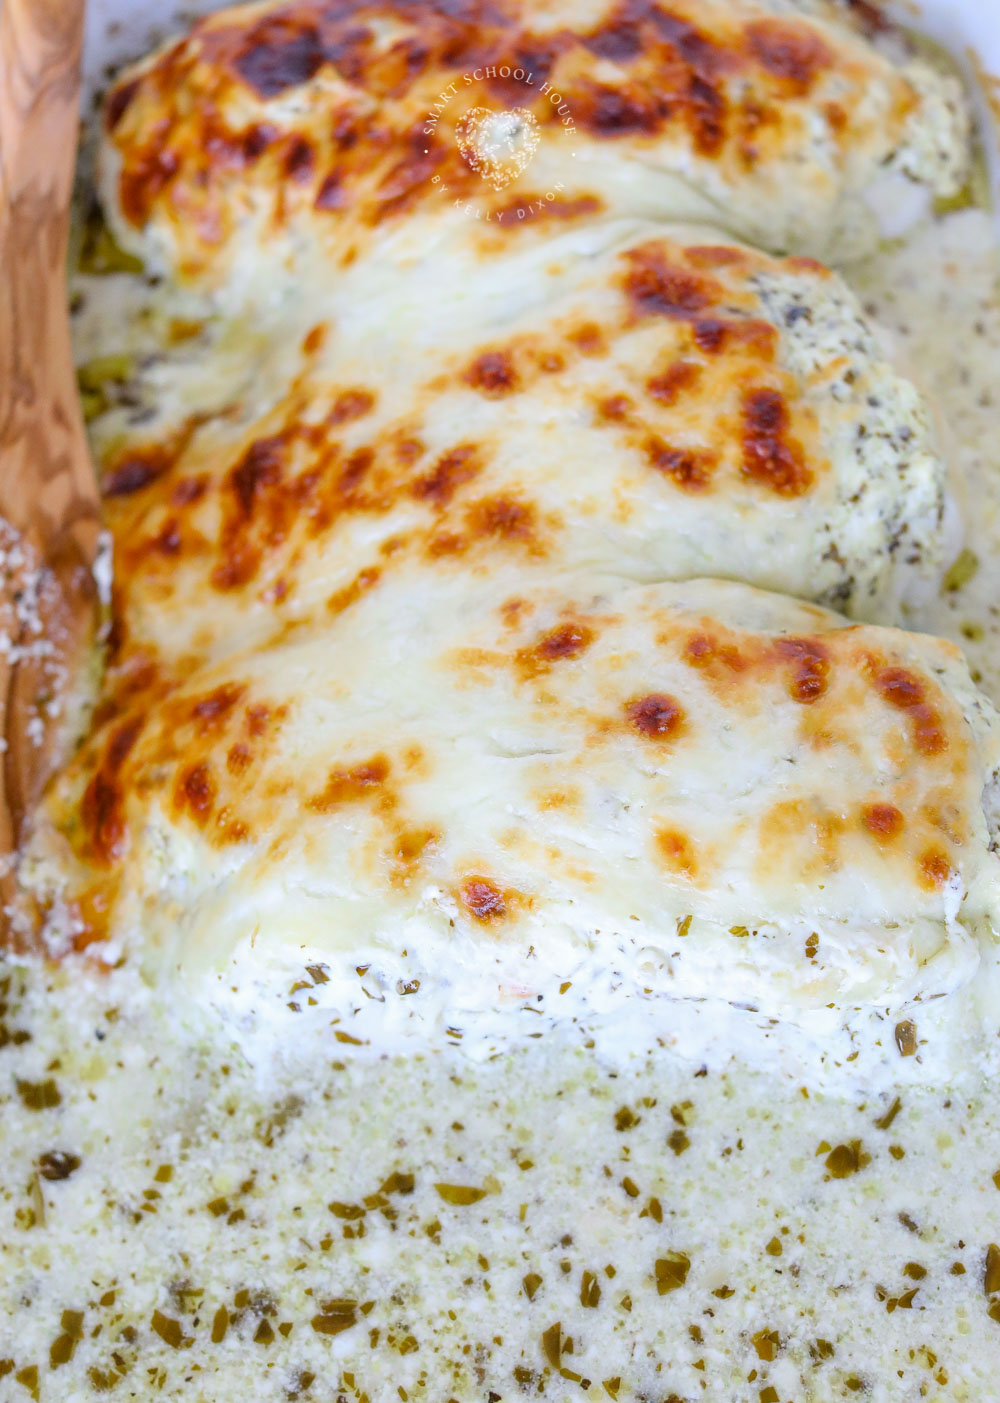 Creamy Pesto Chicken is an easy dinner recipe is made with chicken, cream cheese, pesto, and mozzarella! Simple ingredients that the entire family will love. Serve it with a side salad, rice, pasta, veggies, or anything else you'd like.